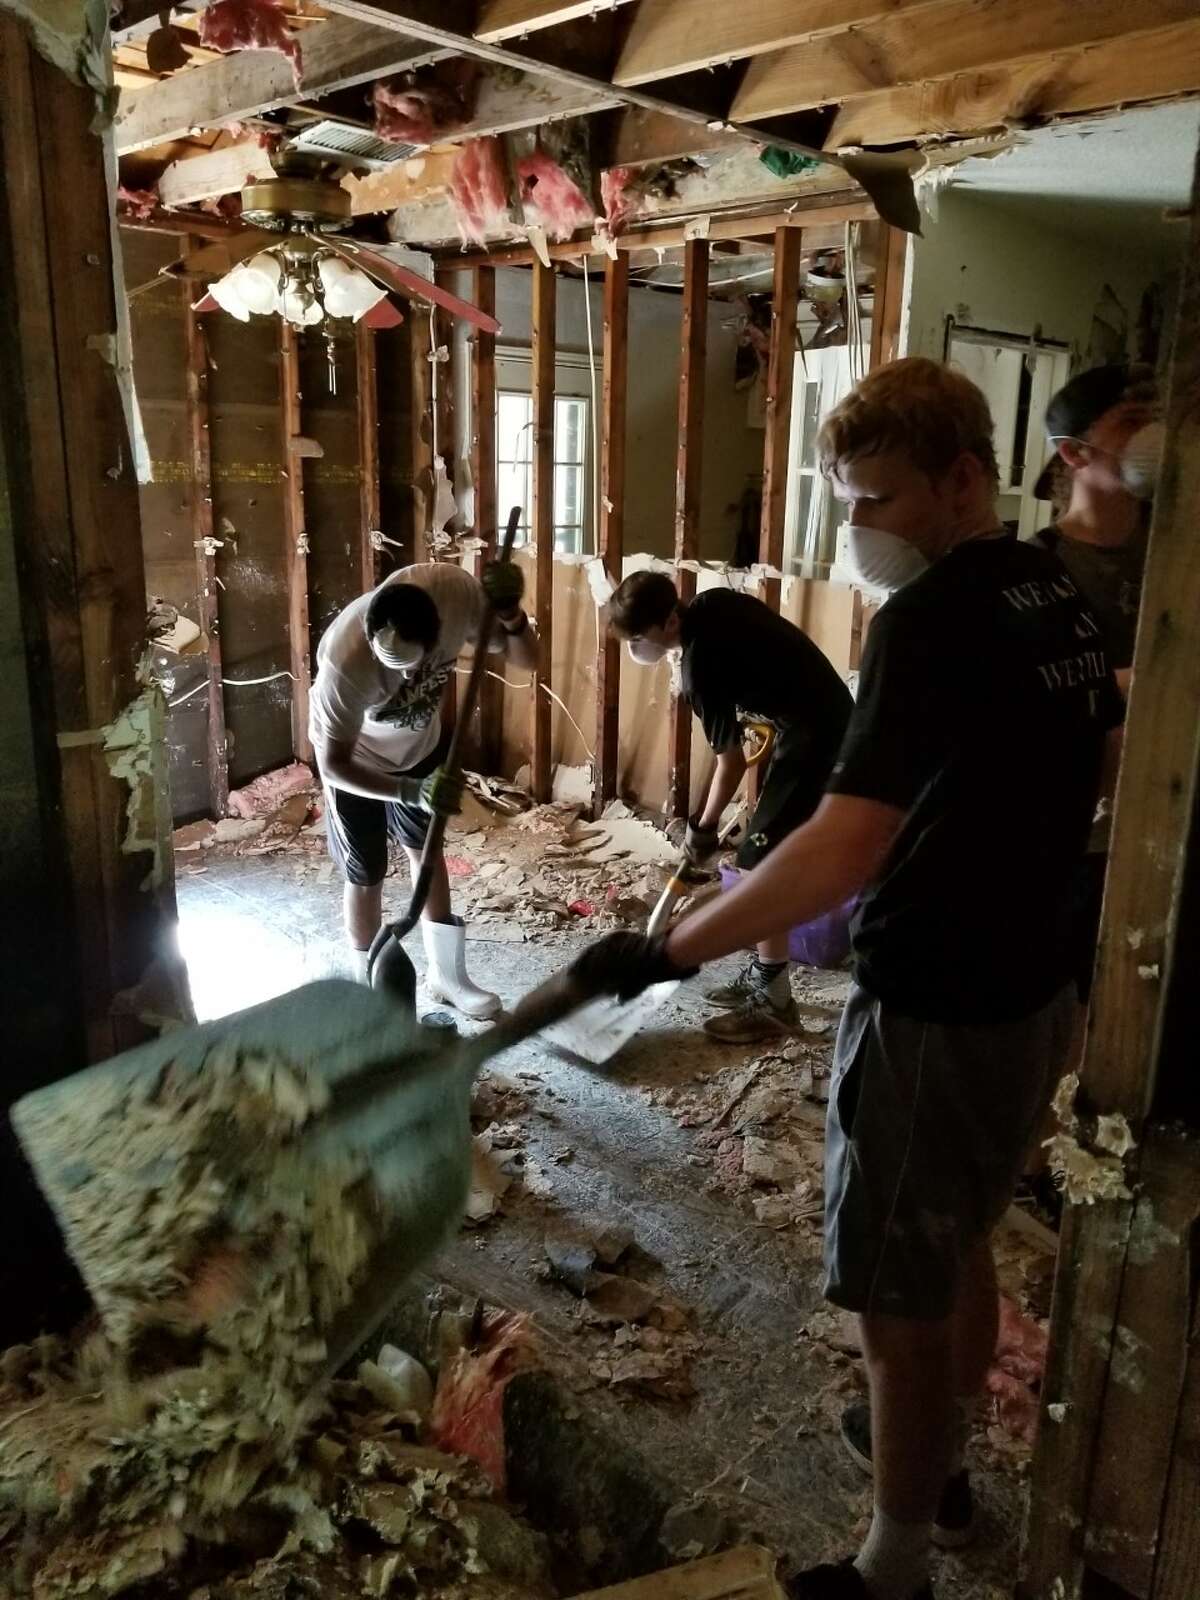 The Conroe Tigers baseball program volunteered in the River Plantation community on Thursday by helping residents clean out damaged materials from their flood-ravaged homes.